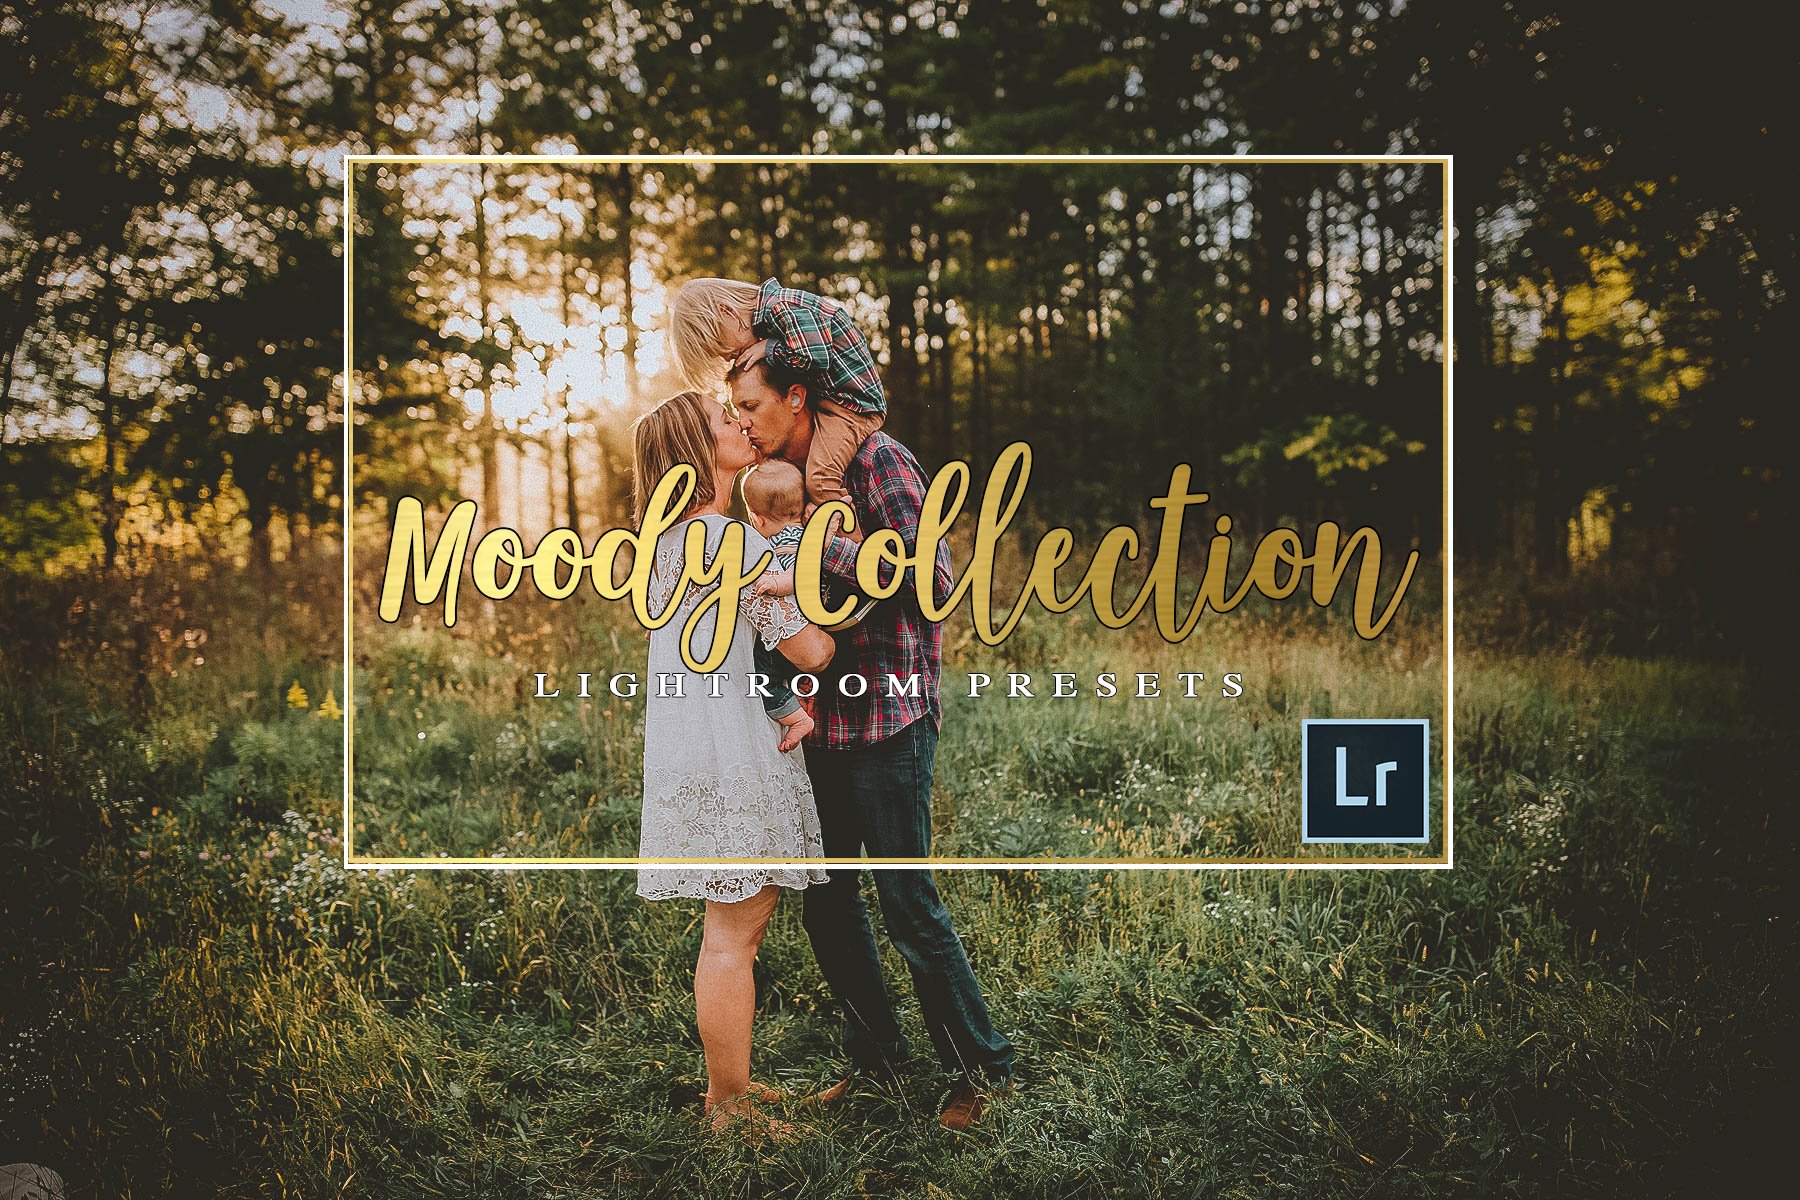 Moody Lightroom Preset Collectioncover image.